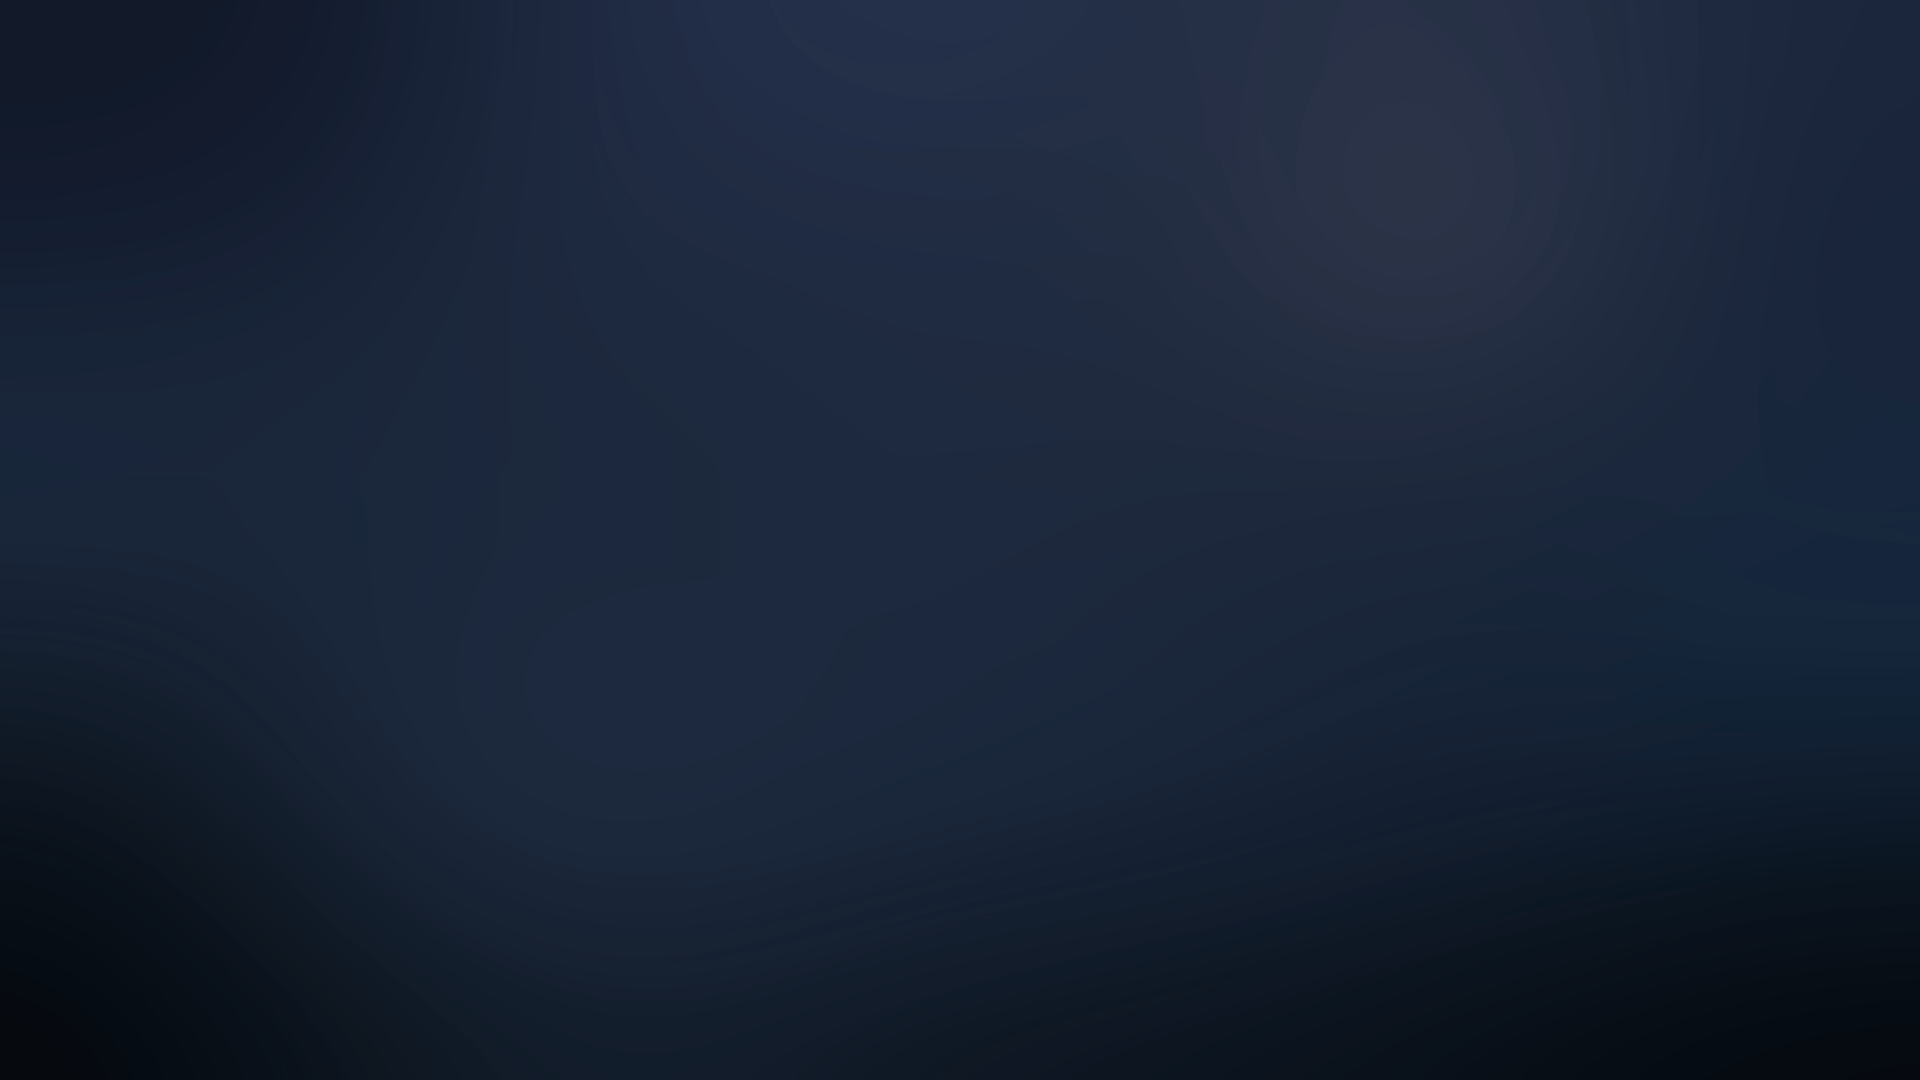 Wallpaper For > Navy Blue Gradient Background